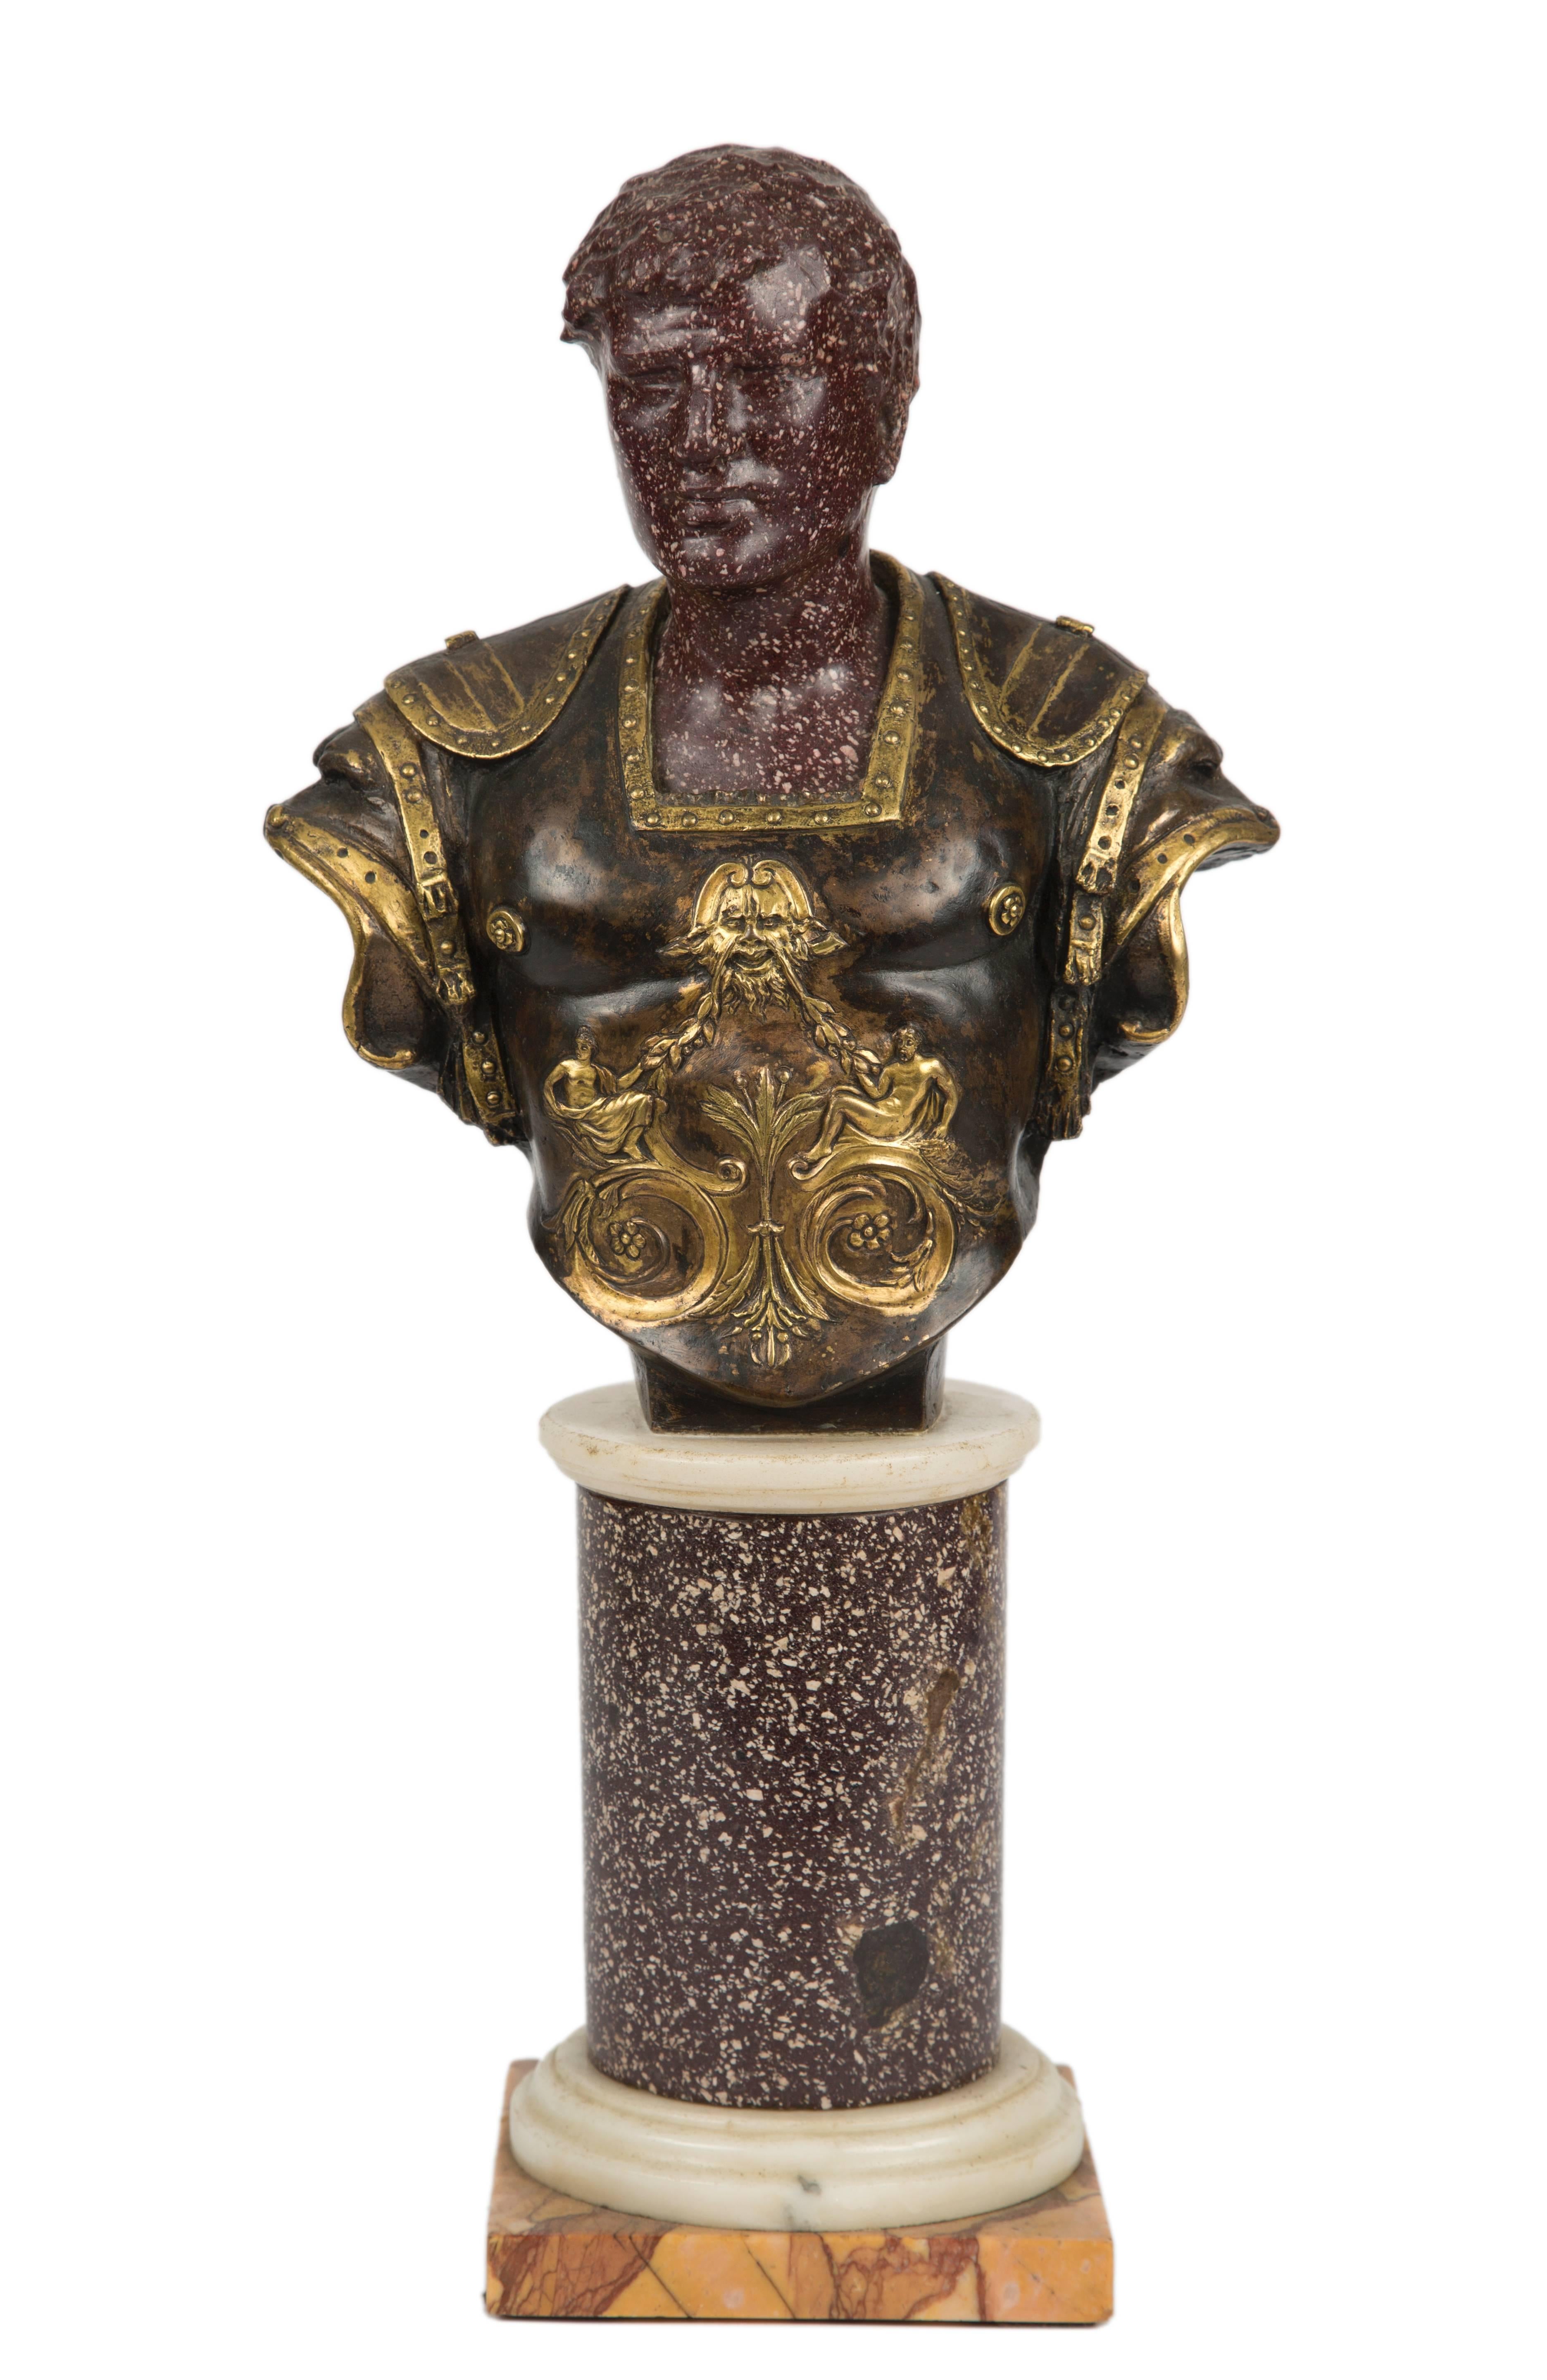 Italian carved porphyry bust of Roman emperor, most likely Caracalla with gilt bronze and patinated mounted armor. Bust is raised on porphyry, white marble, Giallo di Siena pedestal.